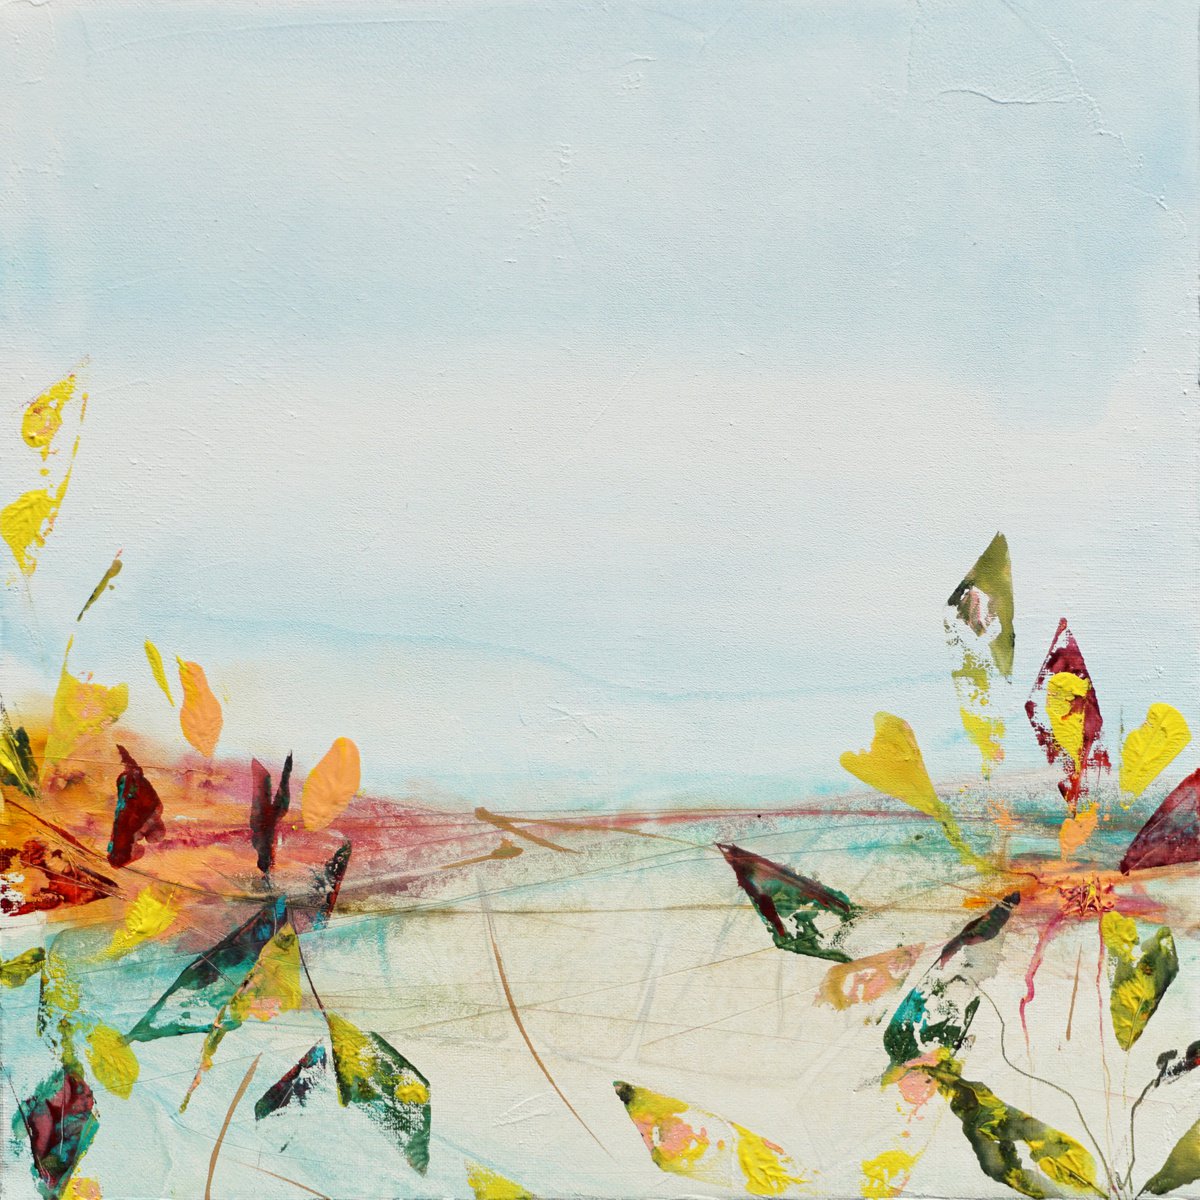 Summer Sounds 35x35 cm (14x14in) by jelena b